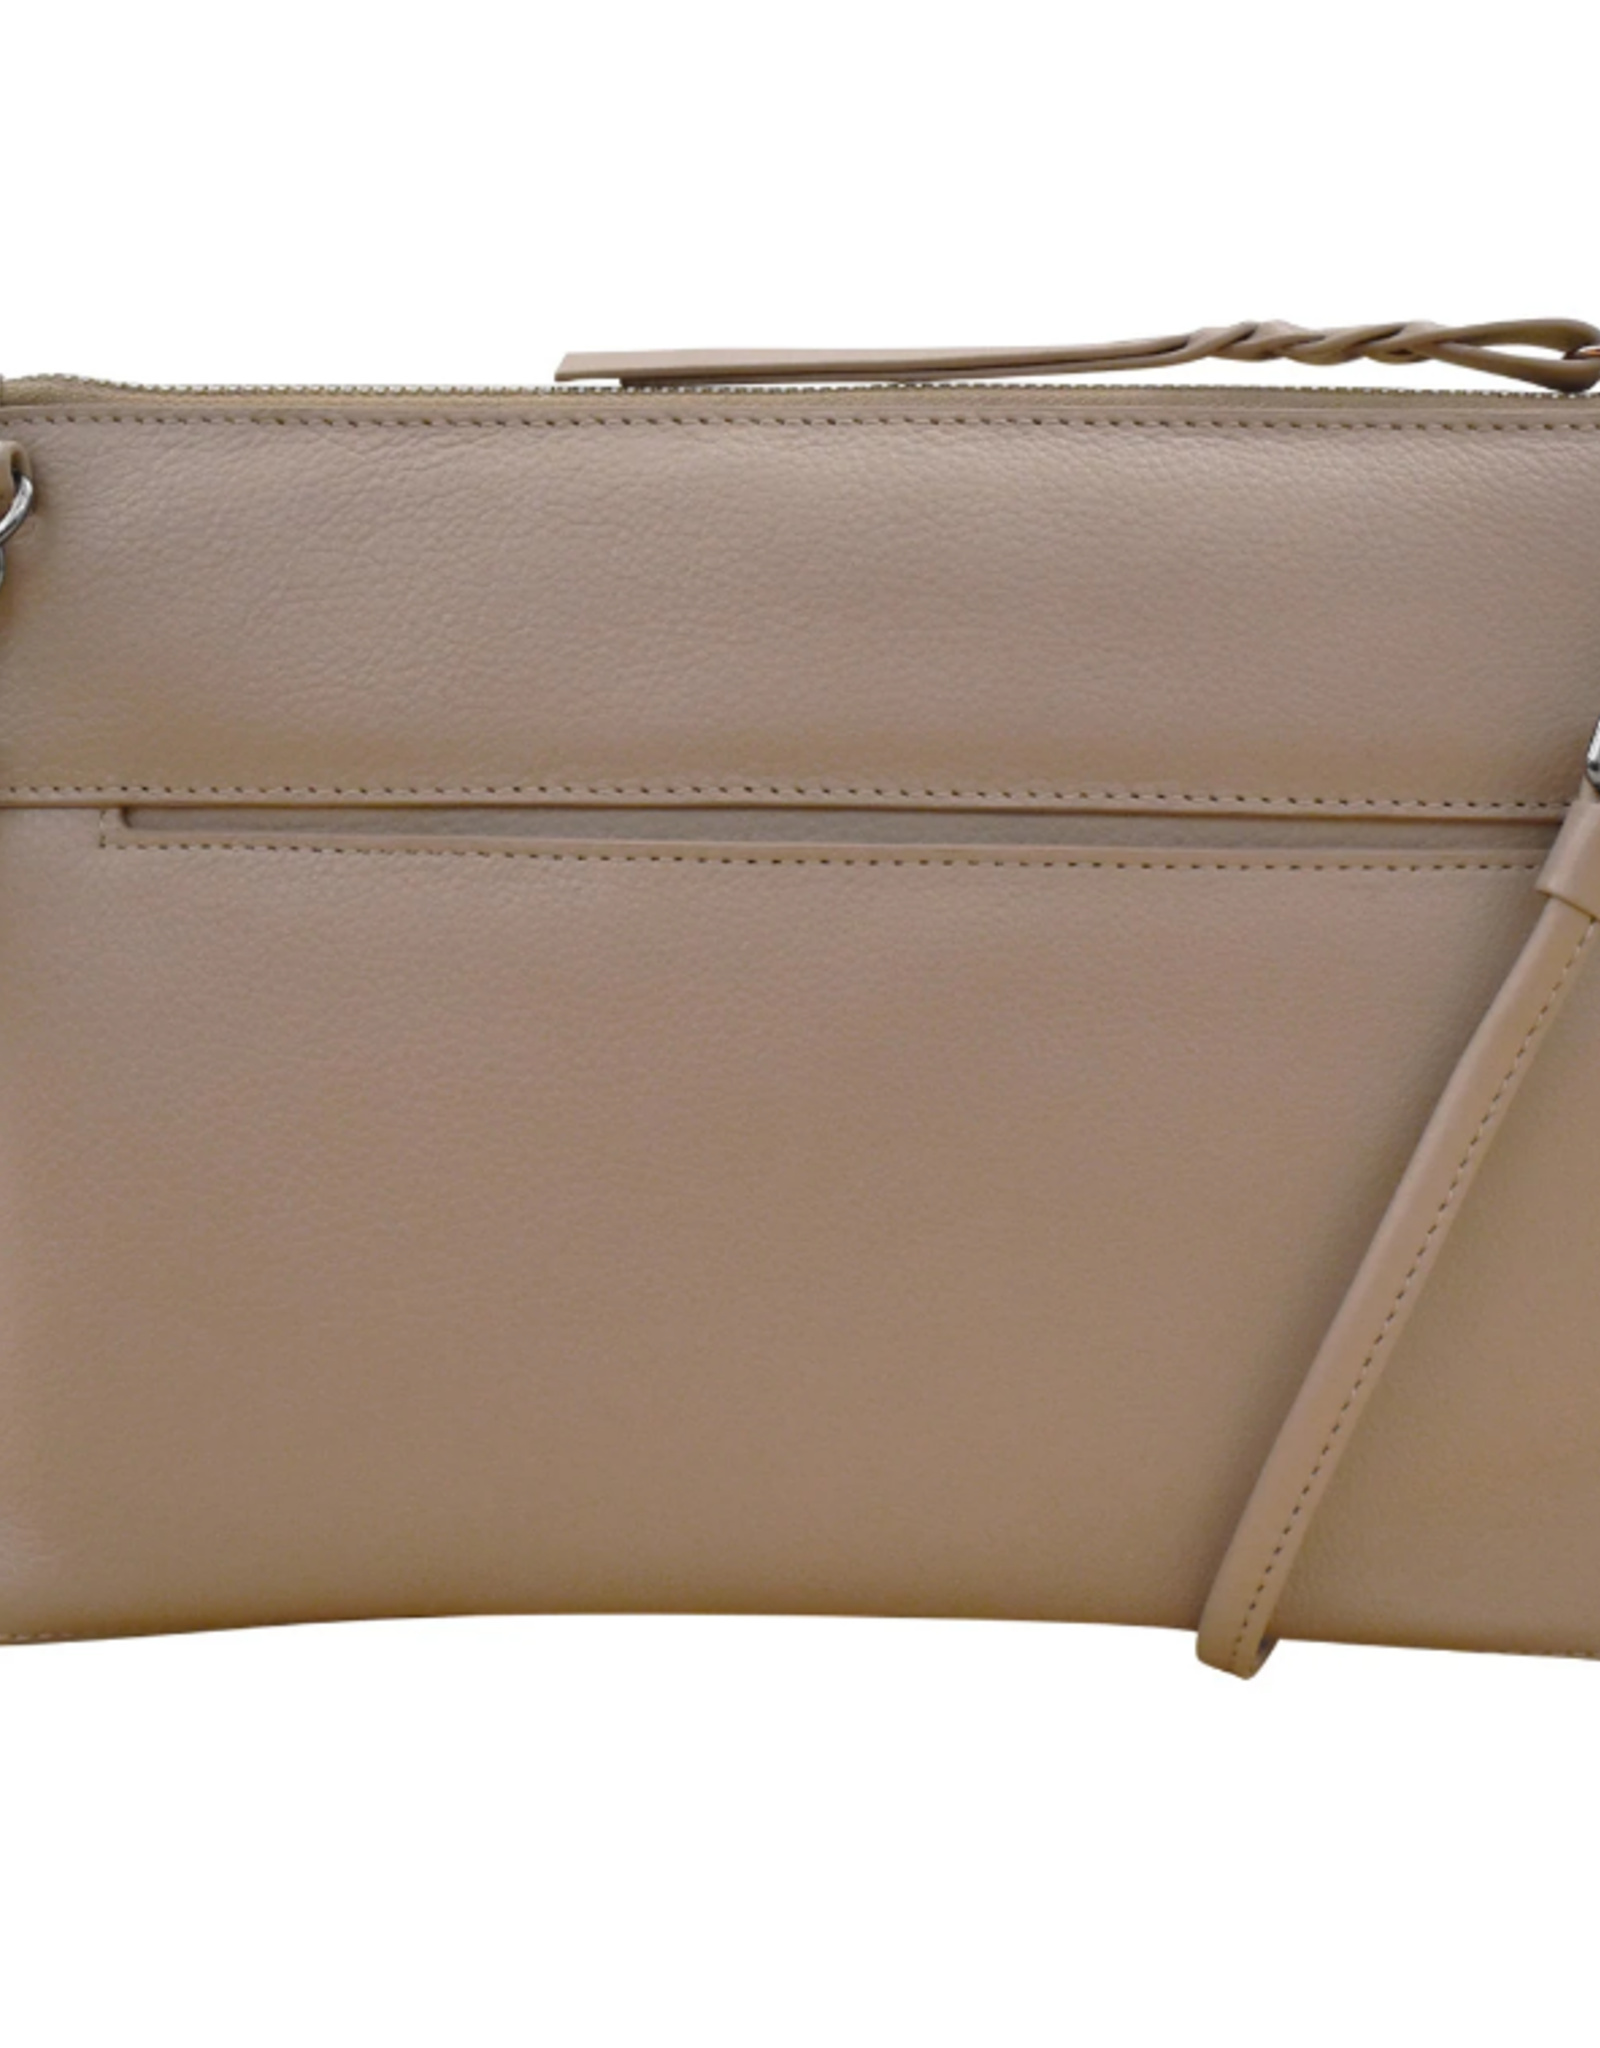 Taupe Envelope Clutch Crossbody